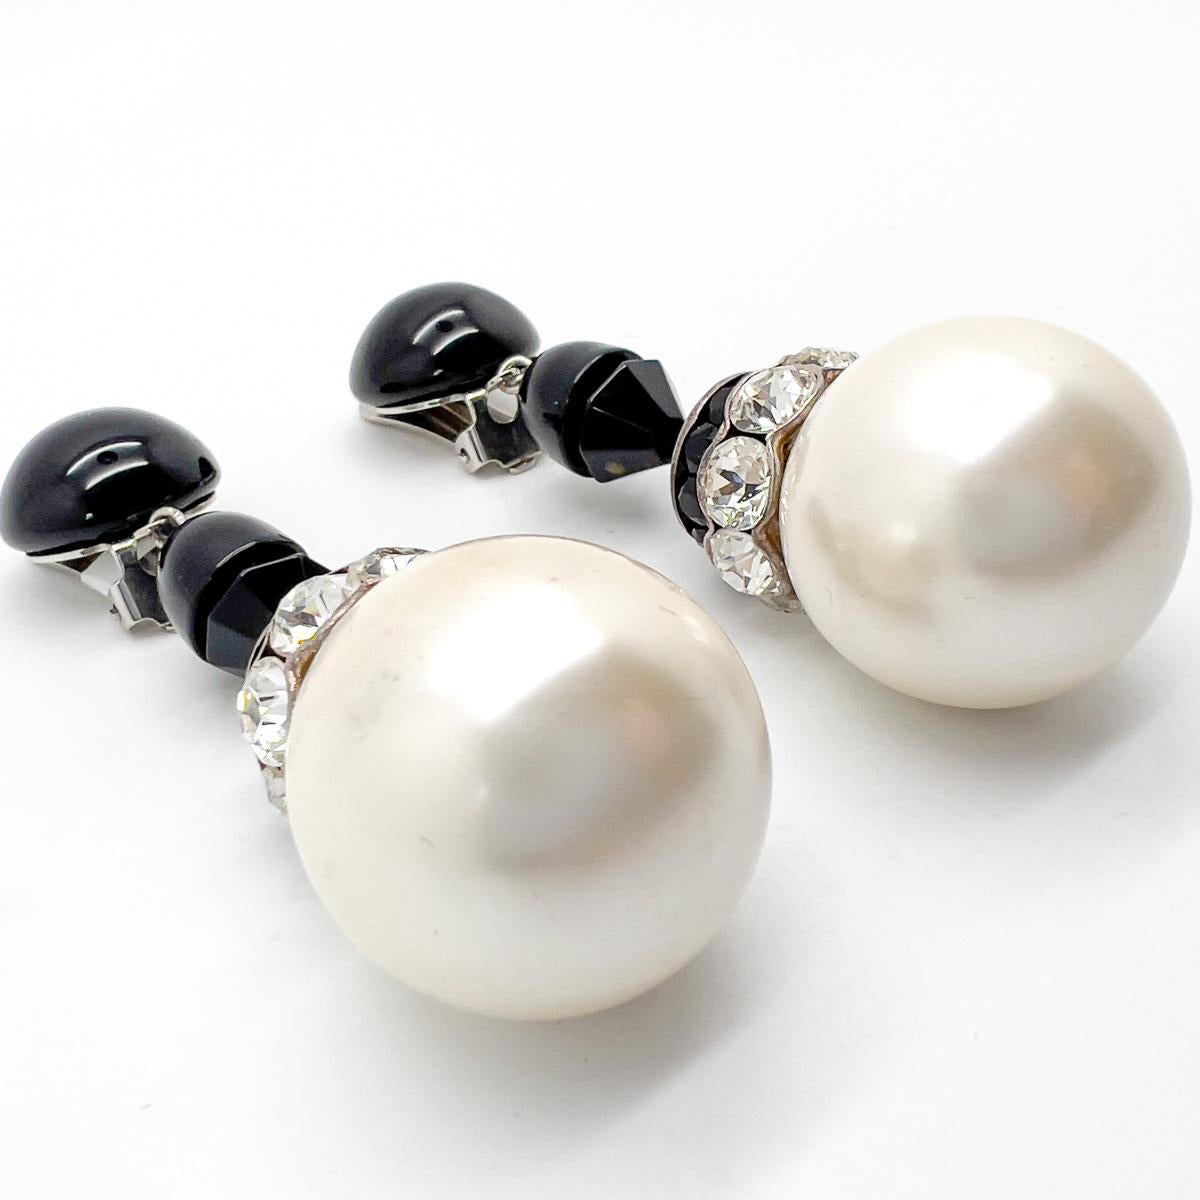 A spectacular pair of Vintage Giant Pearl Monochrome Drop Earrings. Scale and detail abound. Gobstopper size pearls embellished with delightful crystal and black faceted glass in fancy cuts creating an eternally chic item of wearable monochrome art.